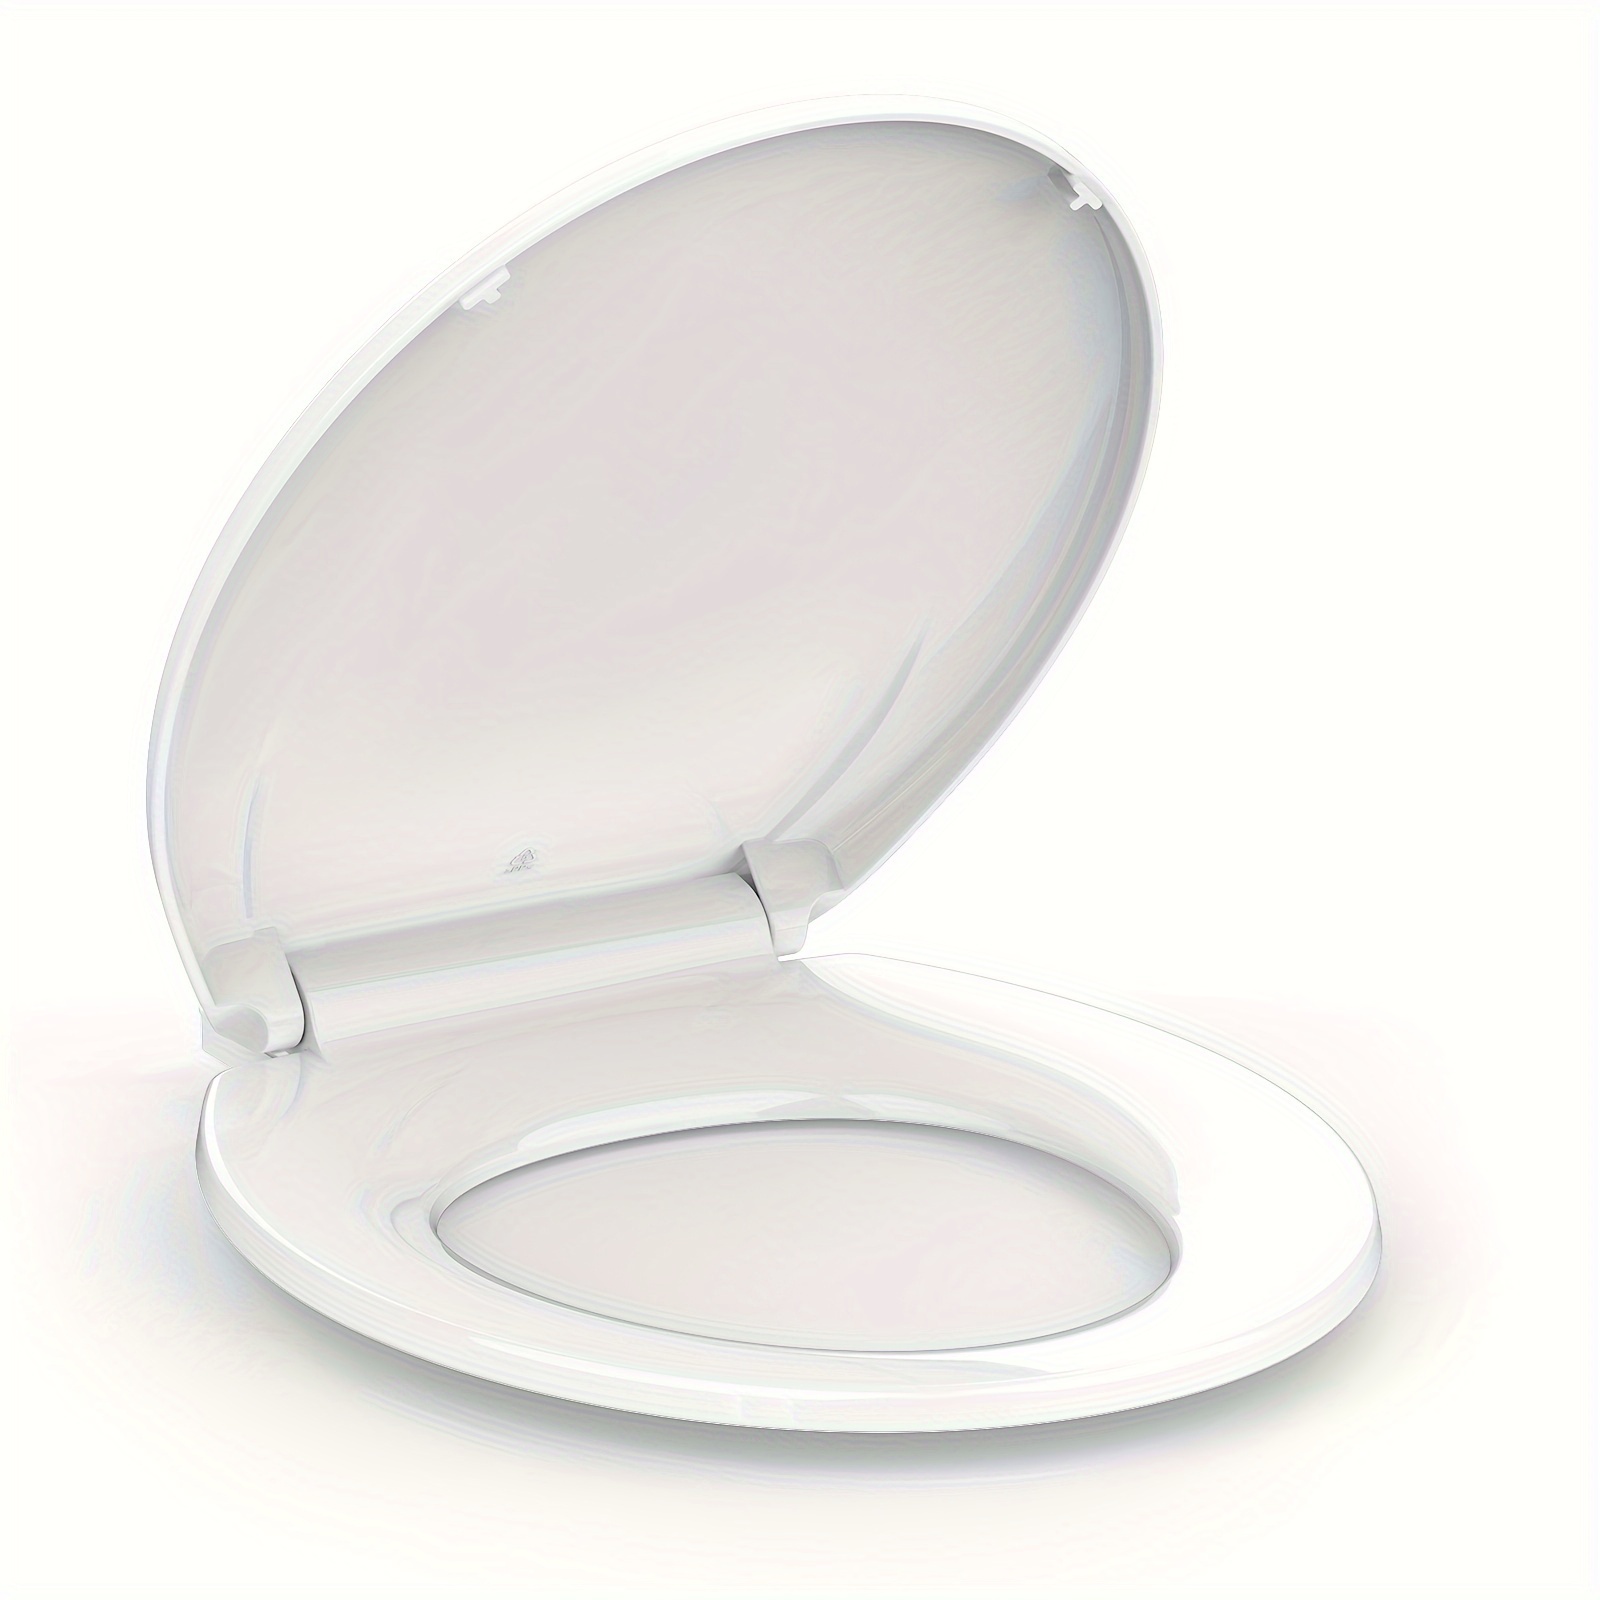 

Toilet Seat, Durable Round Toilet Seat With Quick-release And Quick-attach, Plastic Toilet Seat With Soft Close, Never Loosen, Easy Install And Clean